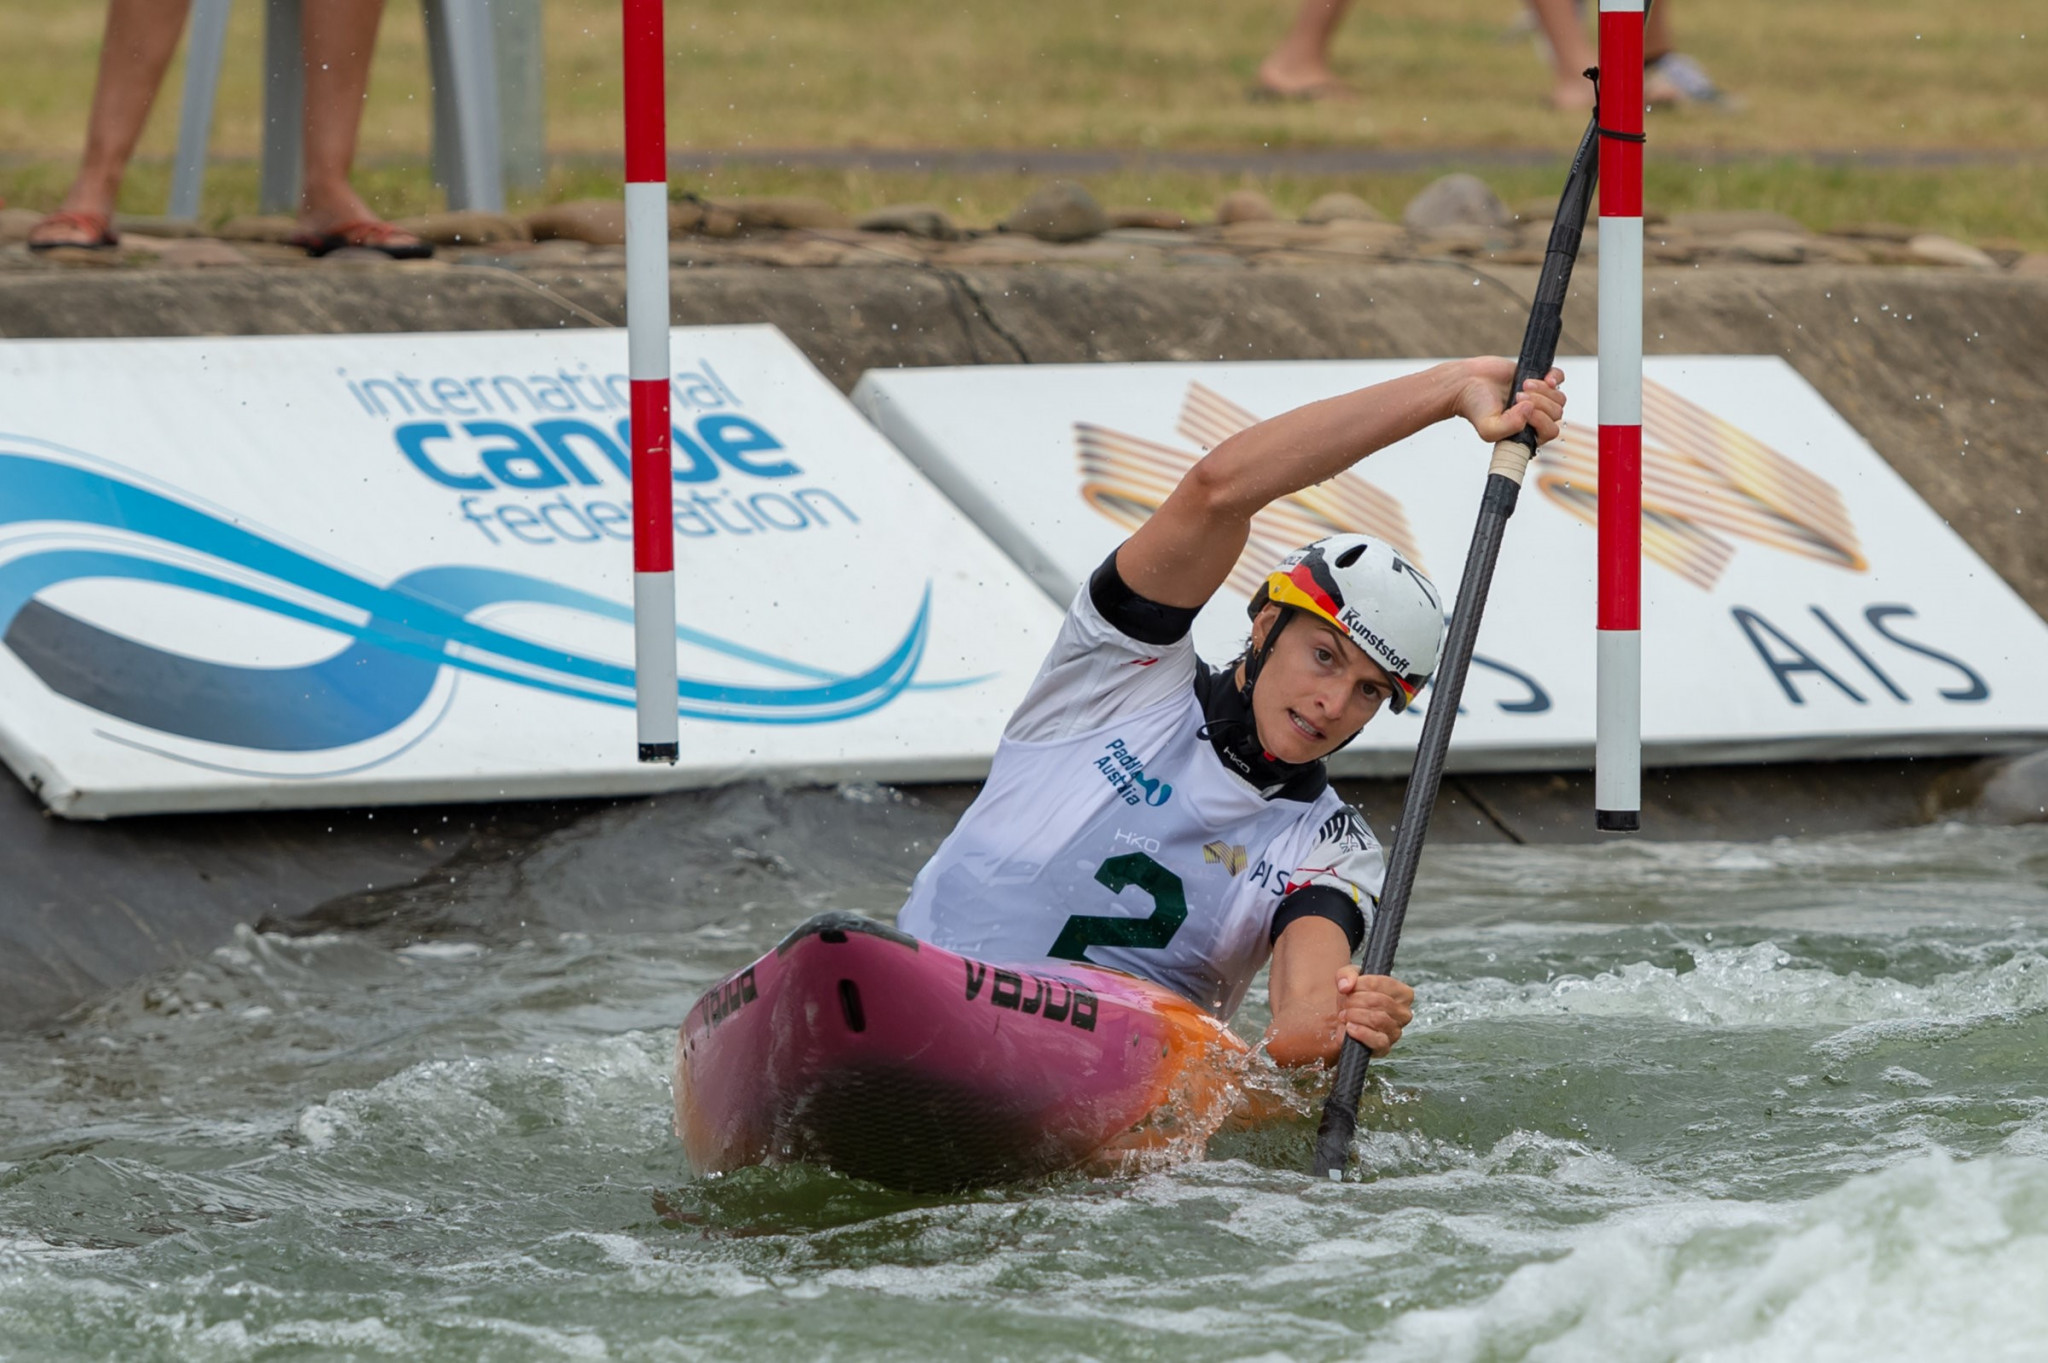 Ricarda Funk won the women's K1 competition as Jessica Fox secured the Oceanian title ©Paddle Australia